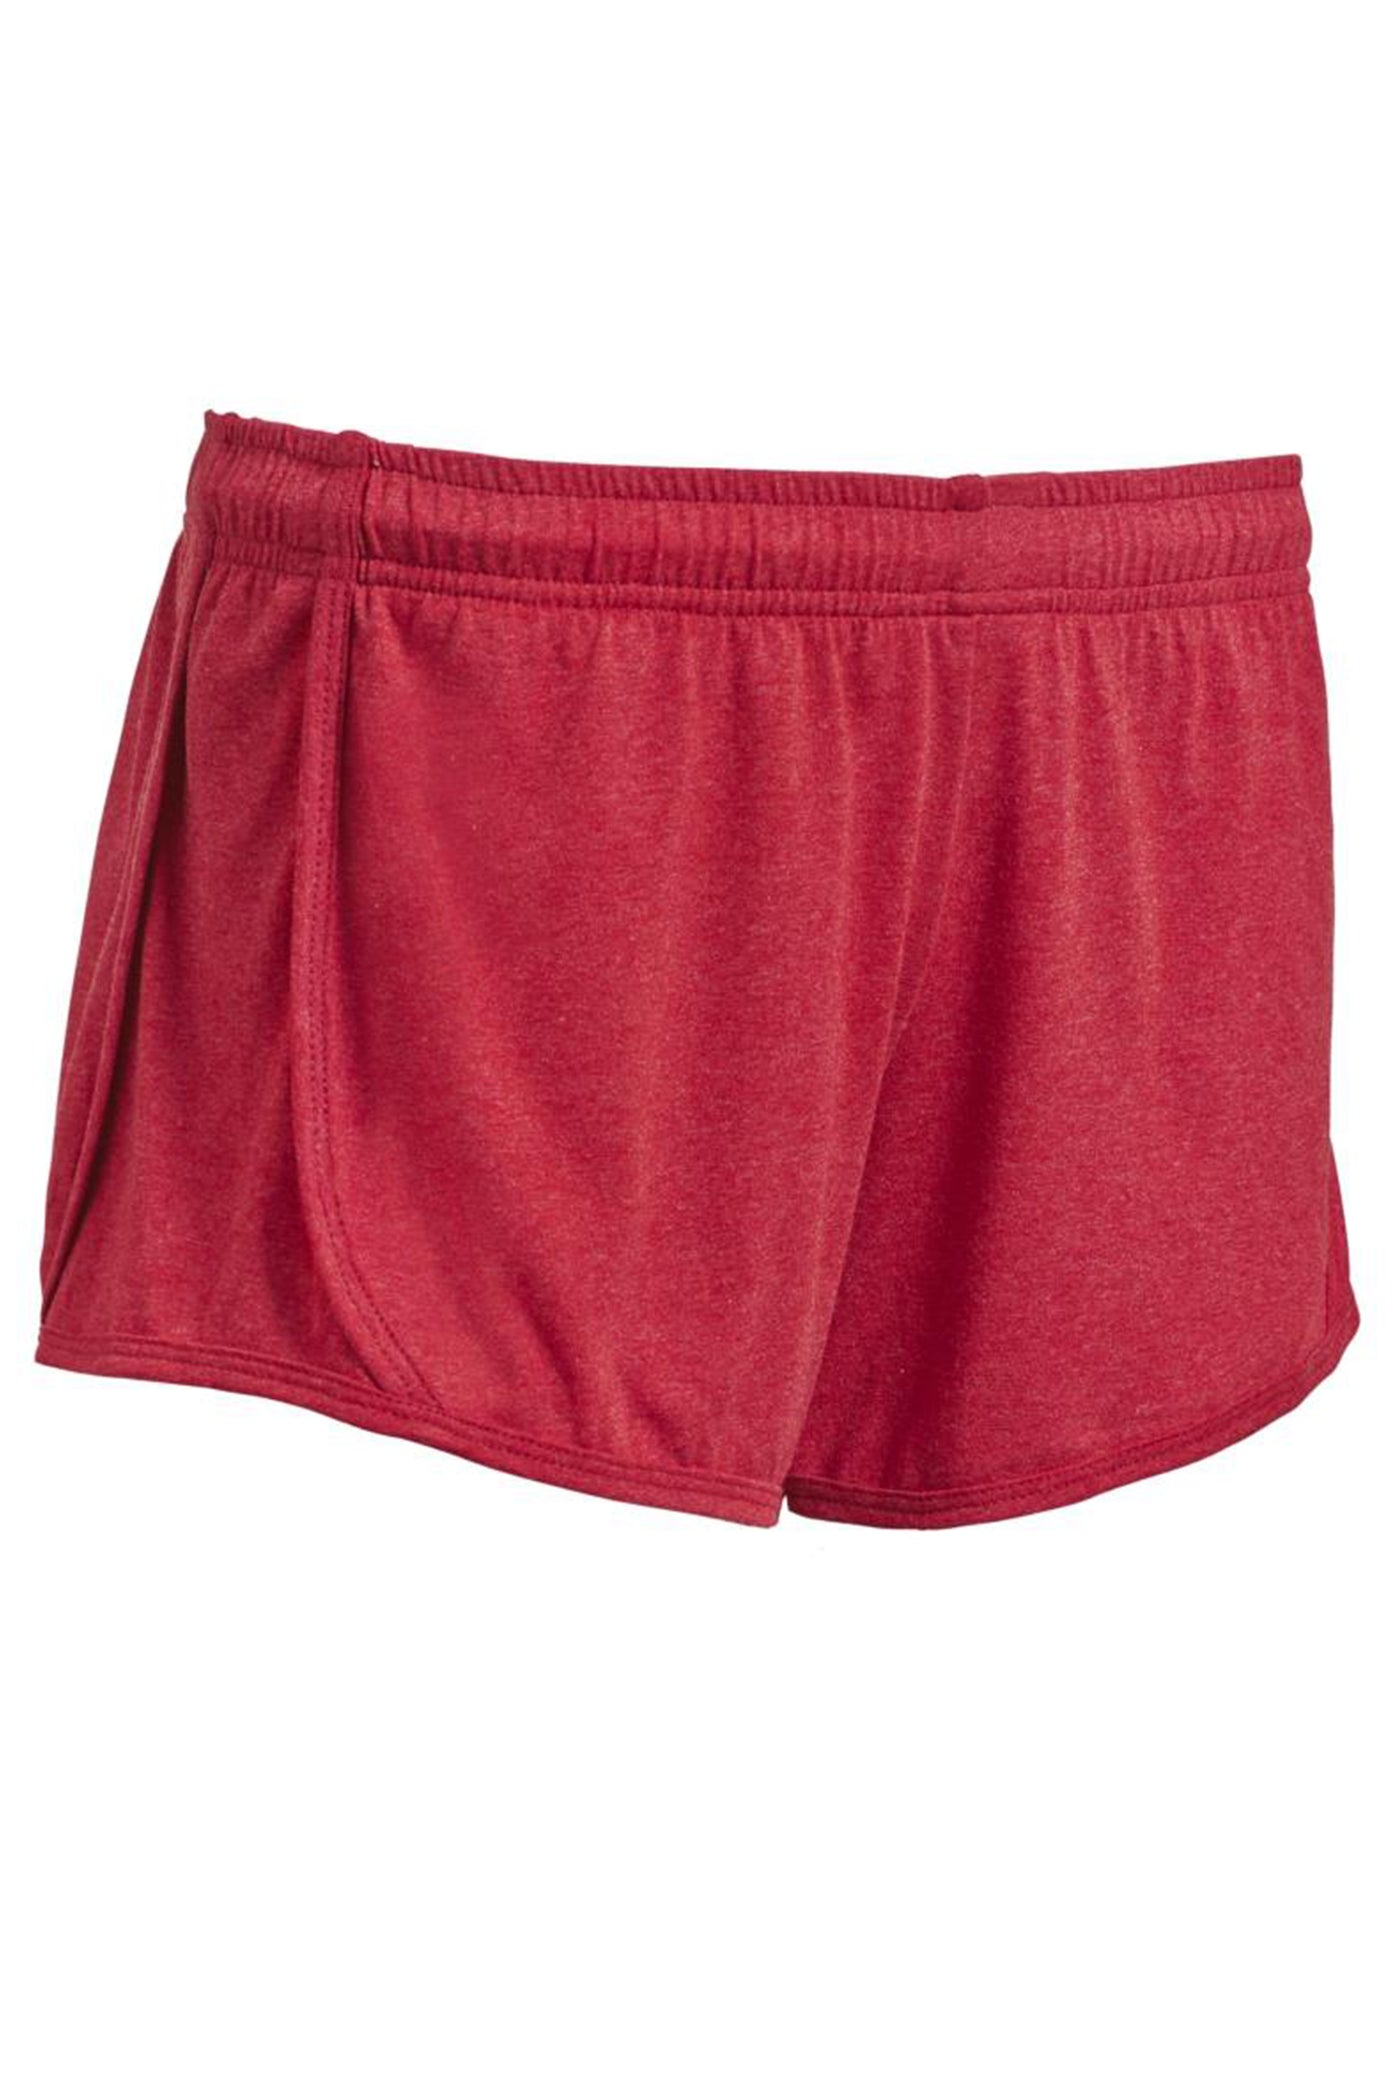 Performance Heather Epic Shorts 🇺🇸 - Expert Brand Apparel#color_dark-heather-red